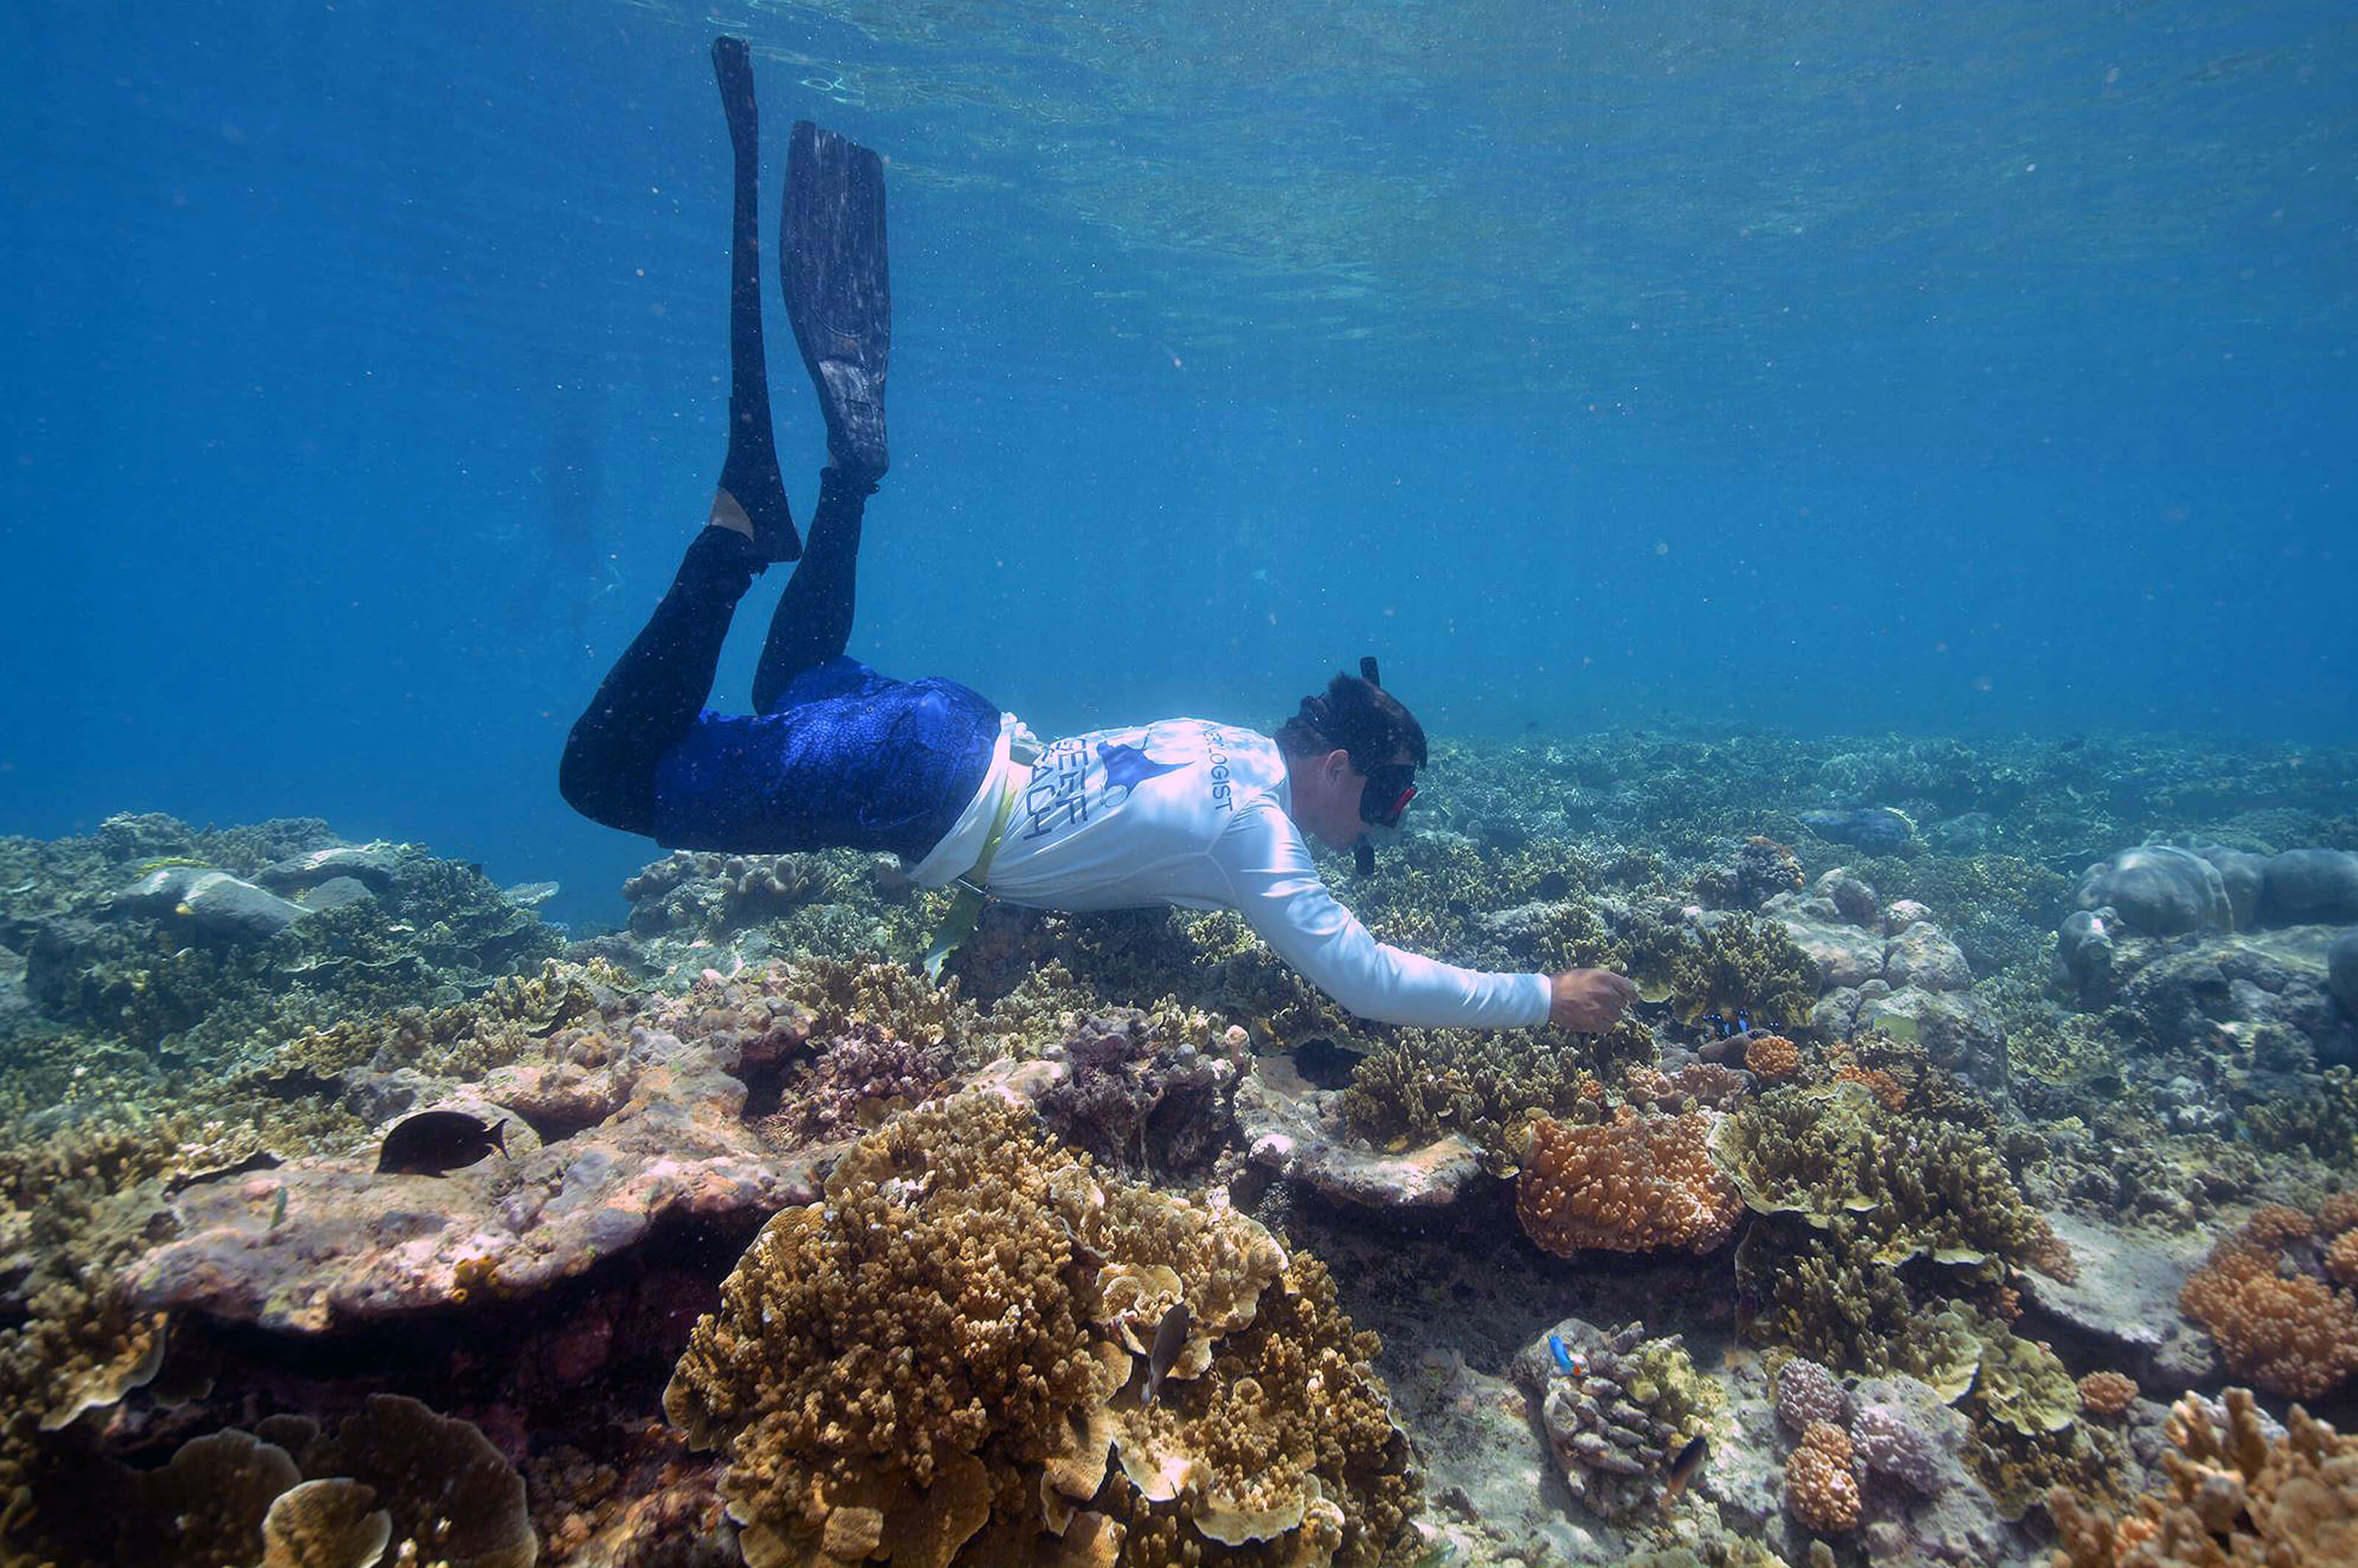 Gareth Phillips snorkelling on the reef